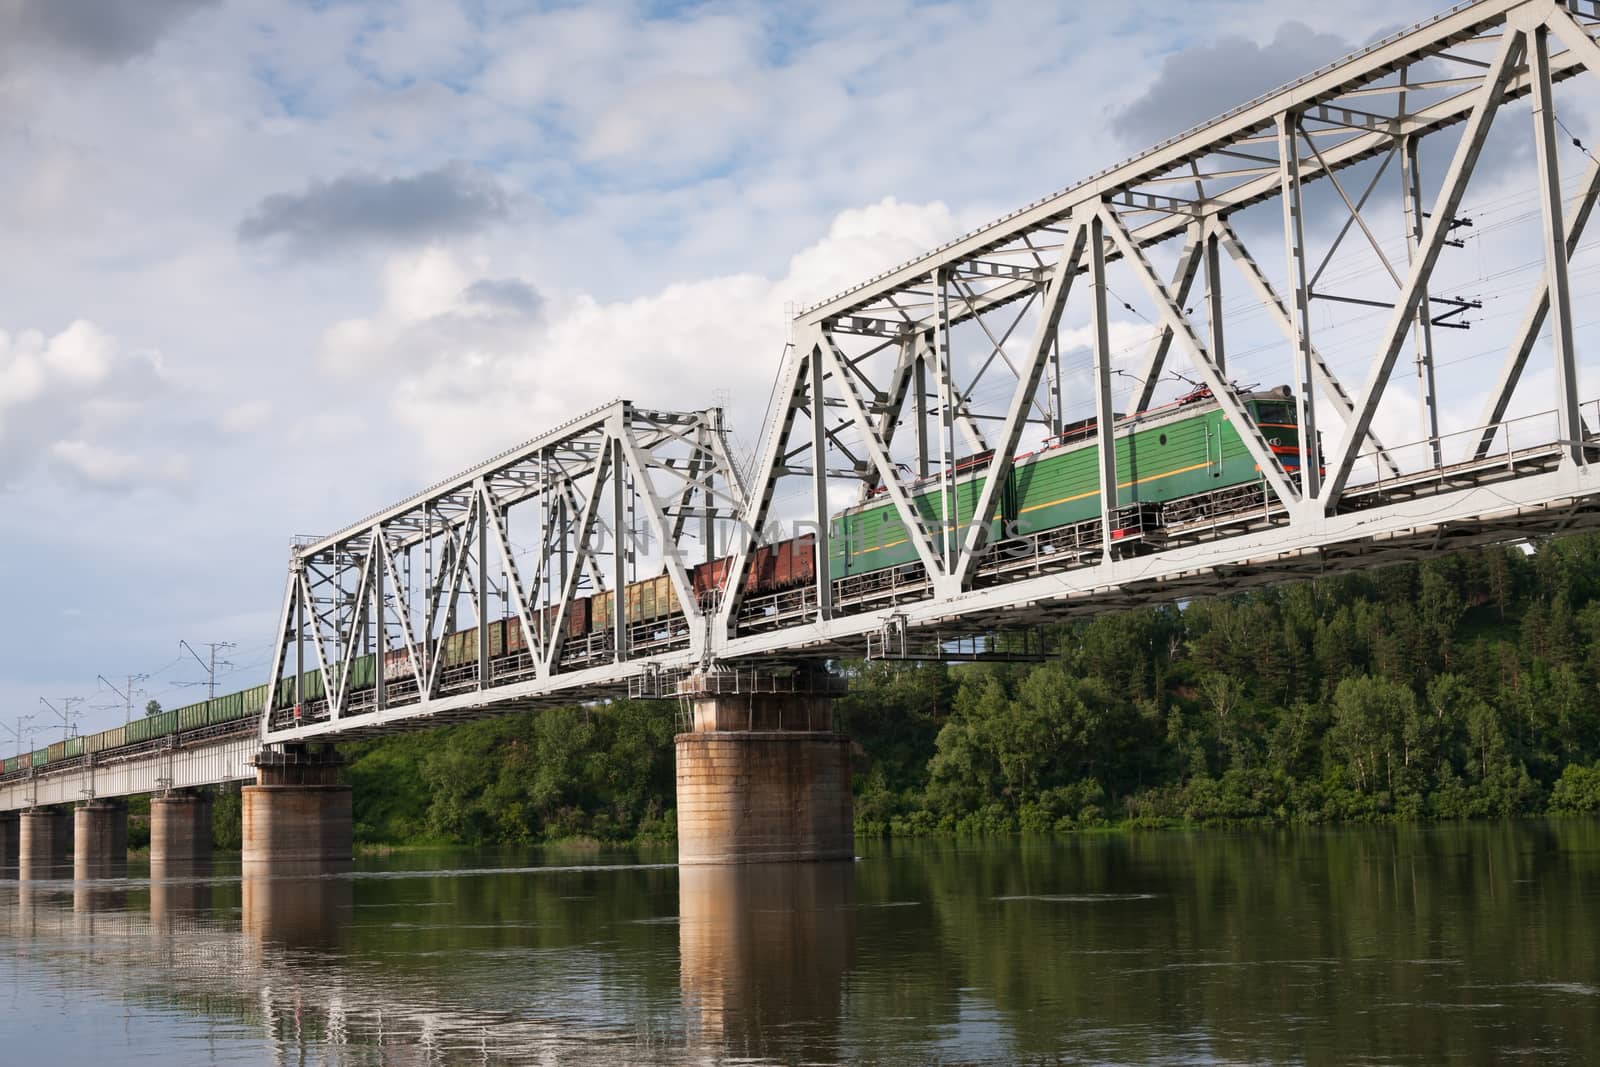  locomotive pulling a freight train on the railway bridge over the river